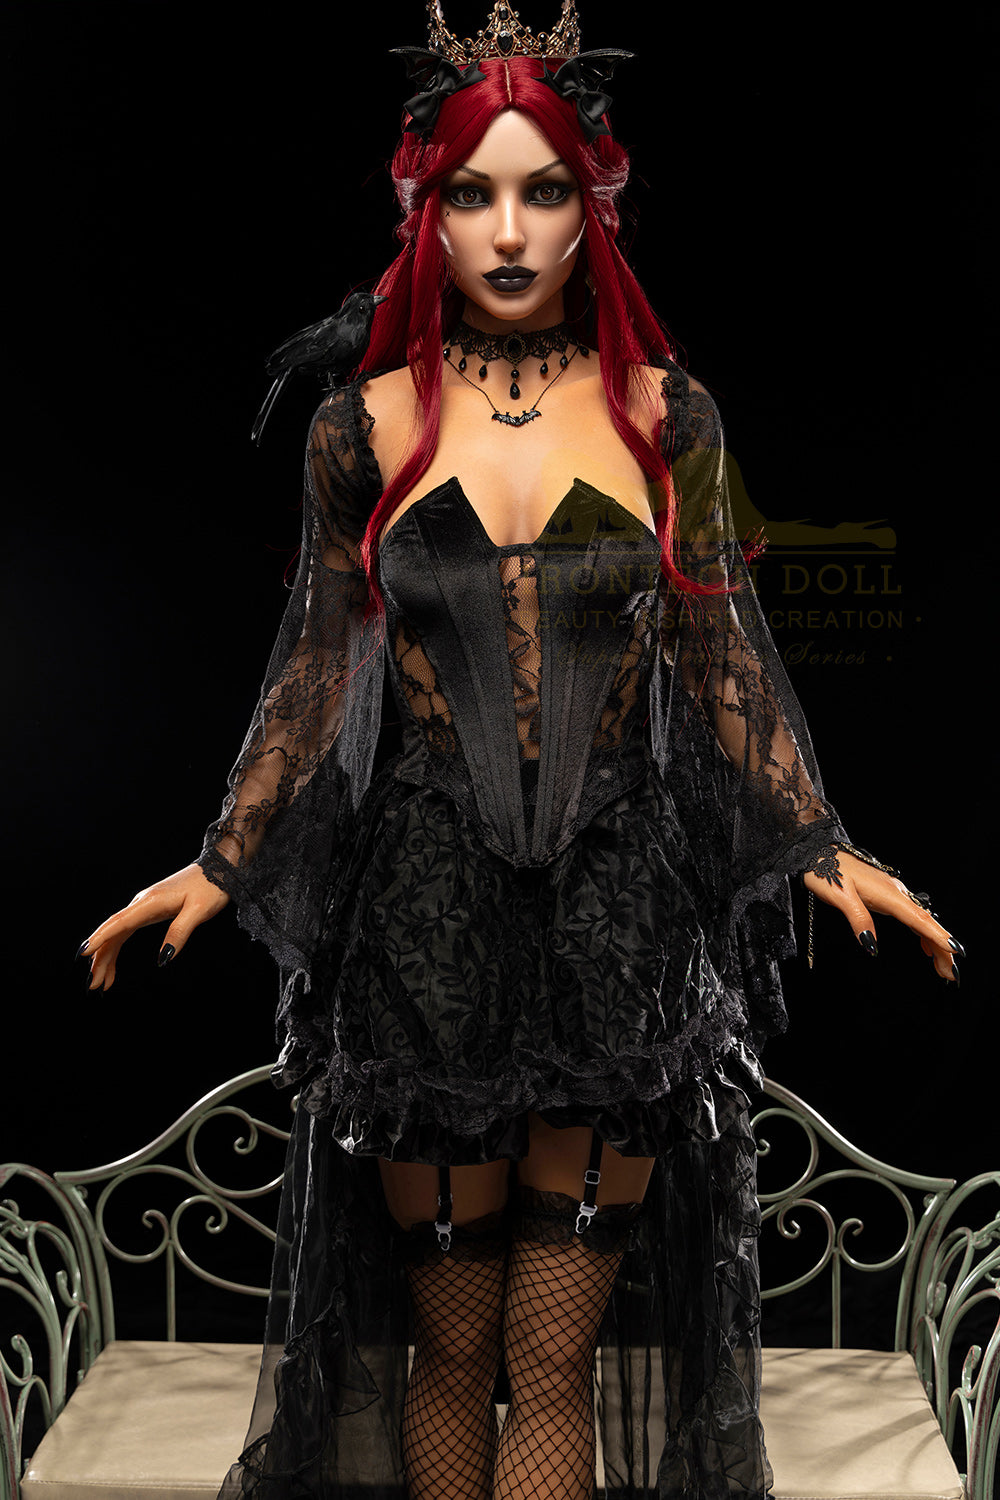 Irontechdoll Sybil 169cm Full Silicone Love Doll S47 Dark Tanned Realistic Adult Sex Doll